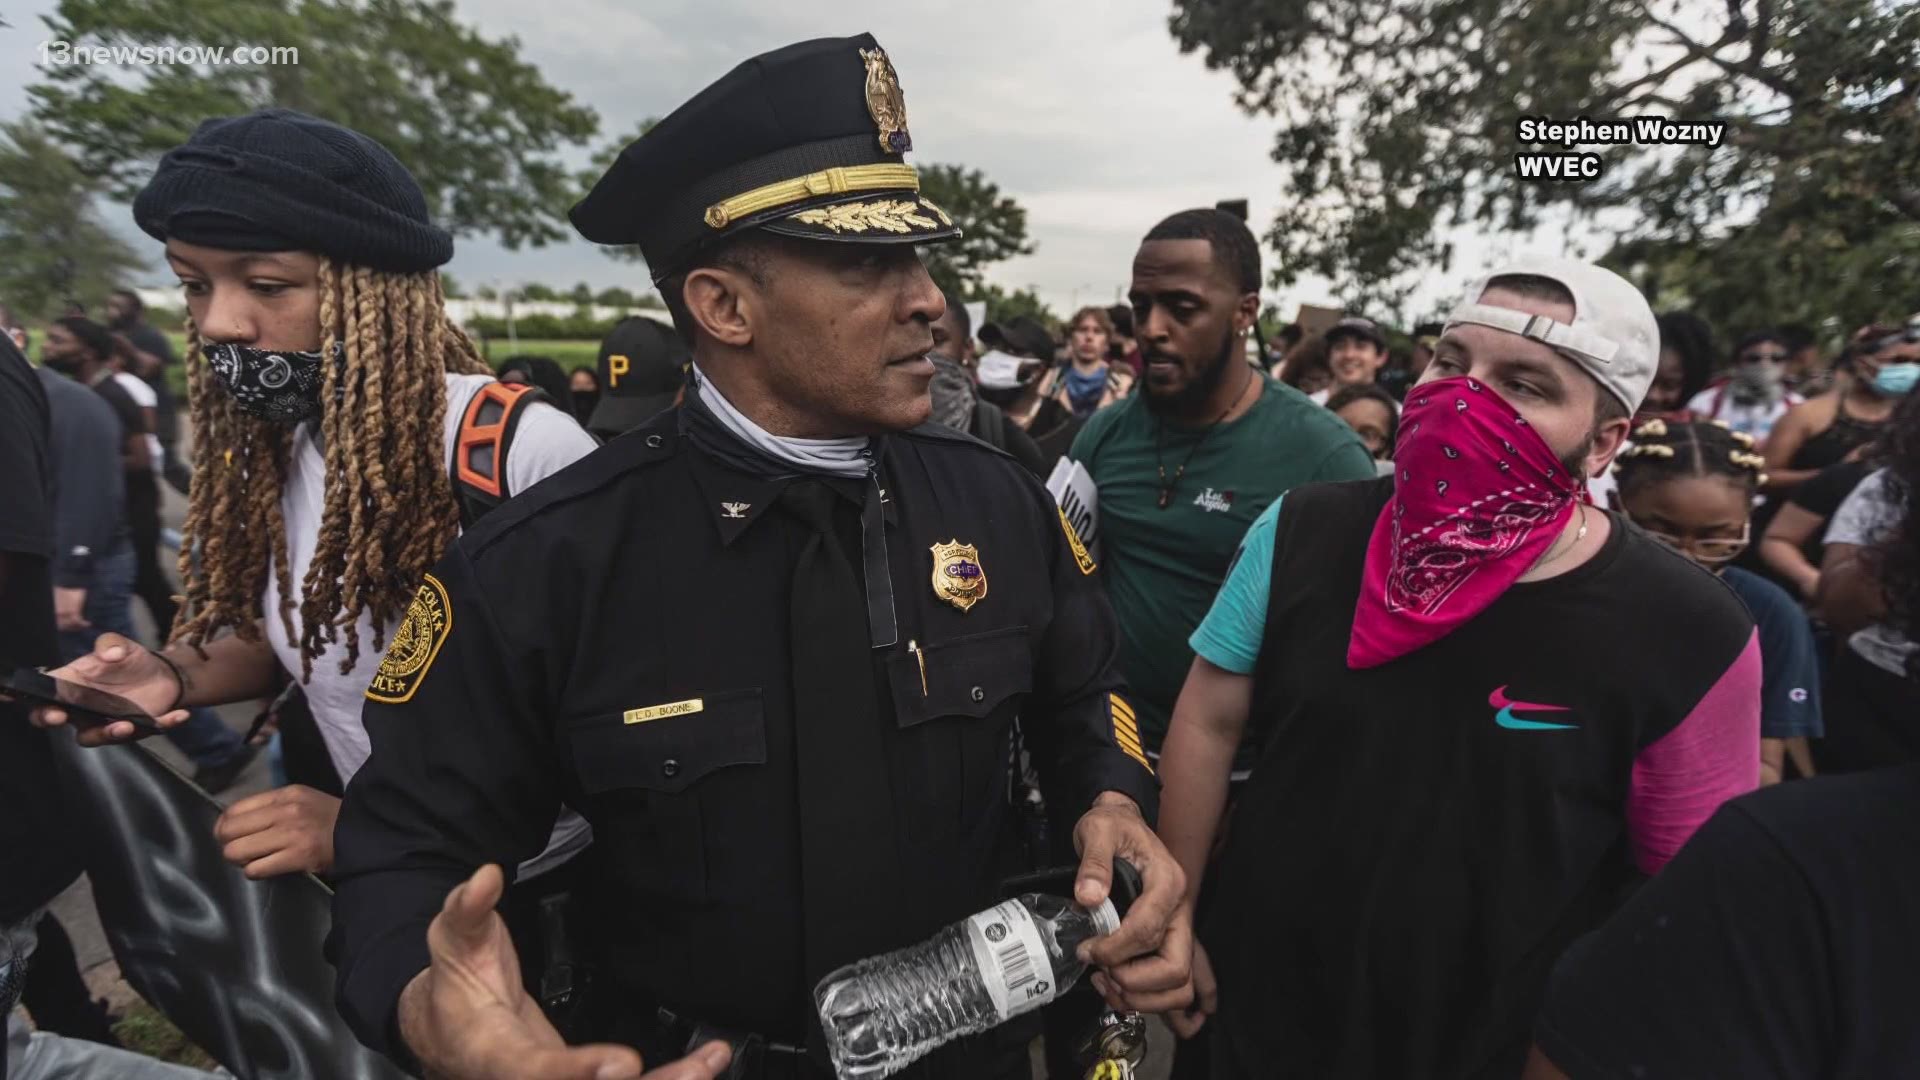 Here in Hampton Roads, demonstrators challenged police departments for change and accountability. But what has actually happened?